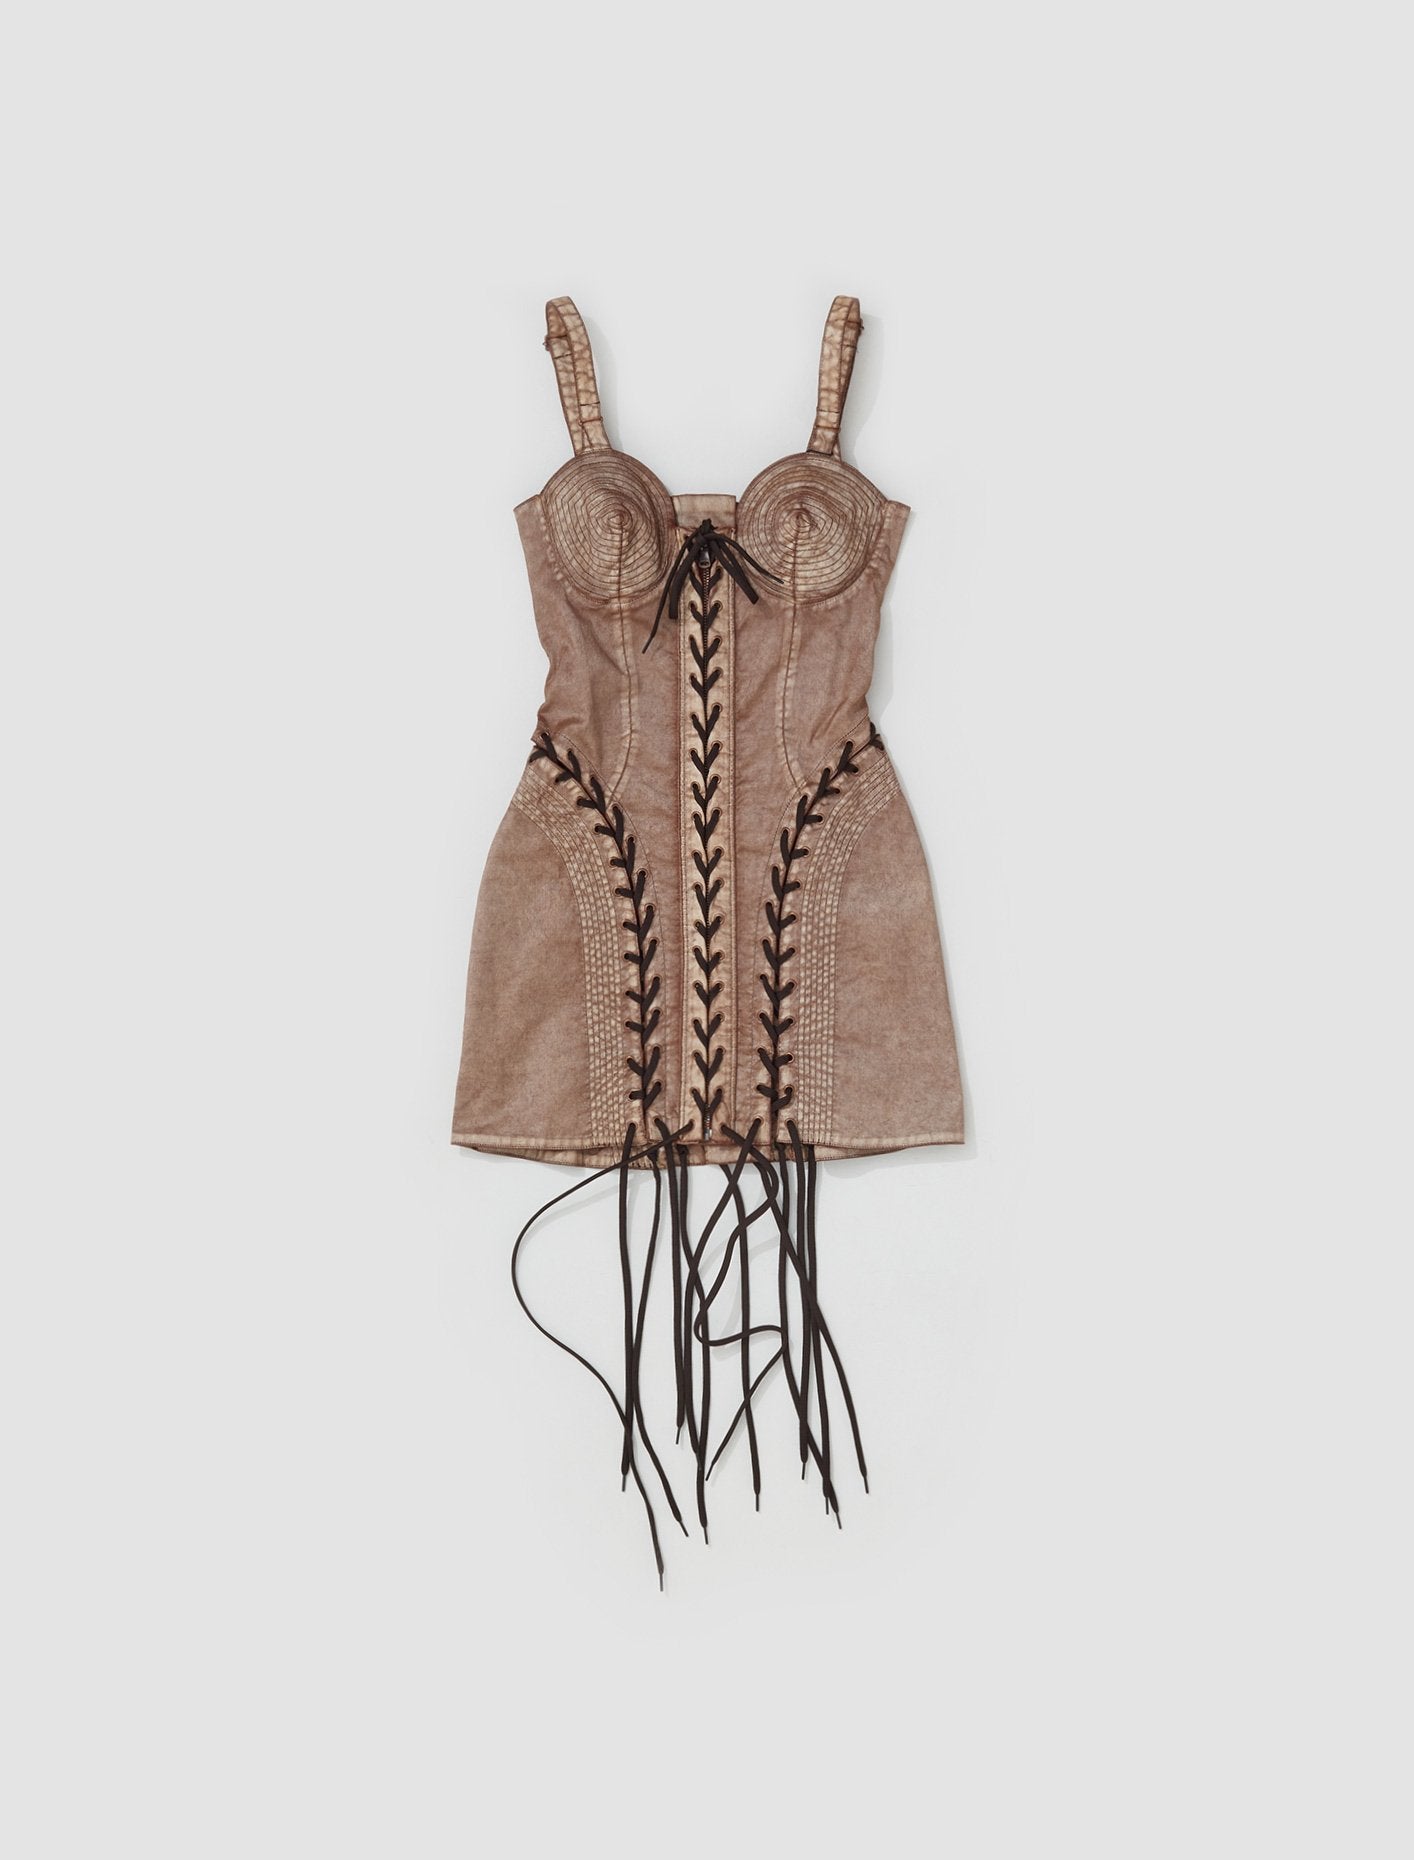 x KNWLS Conical Laced Dress in Brown & Ecru